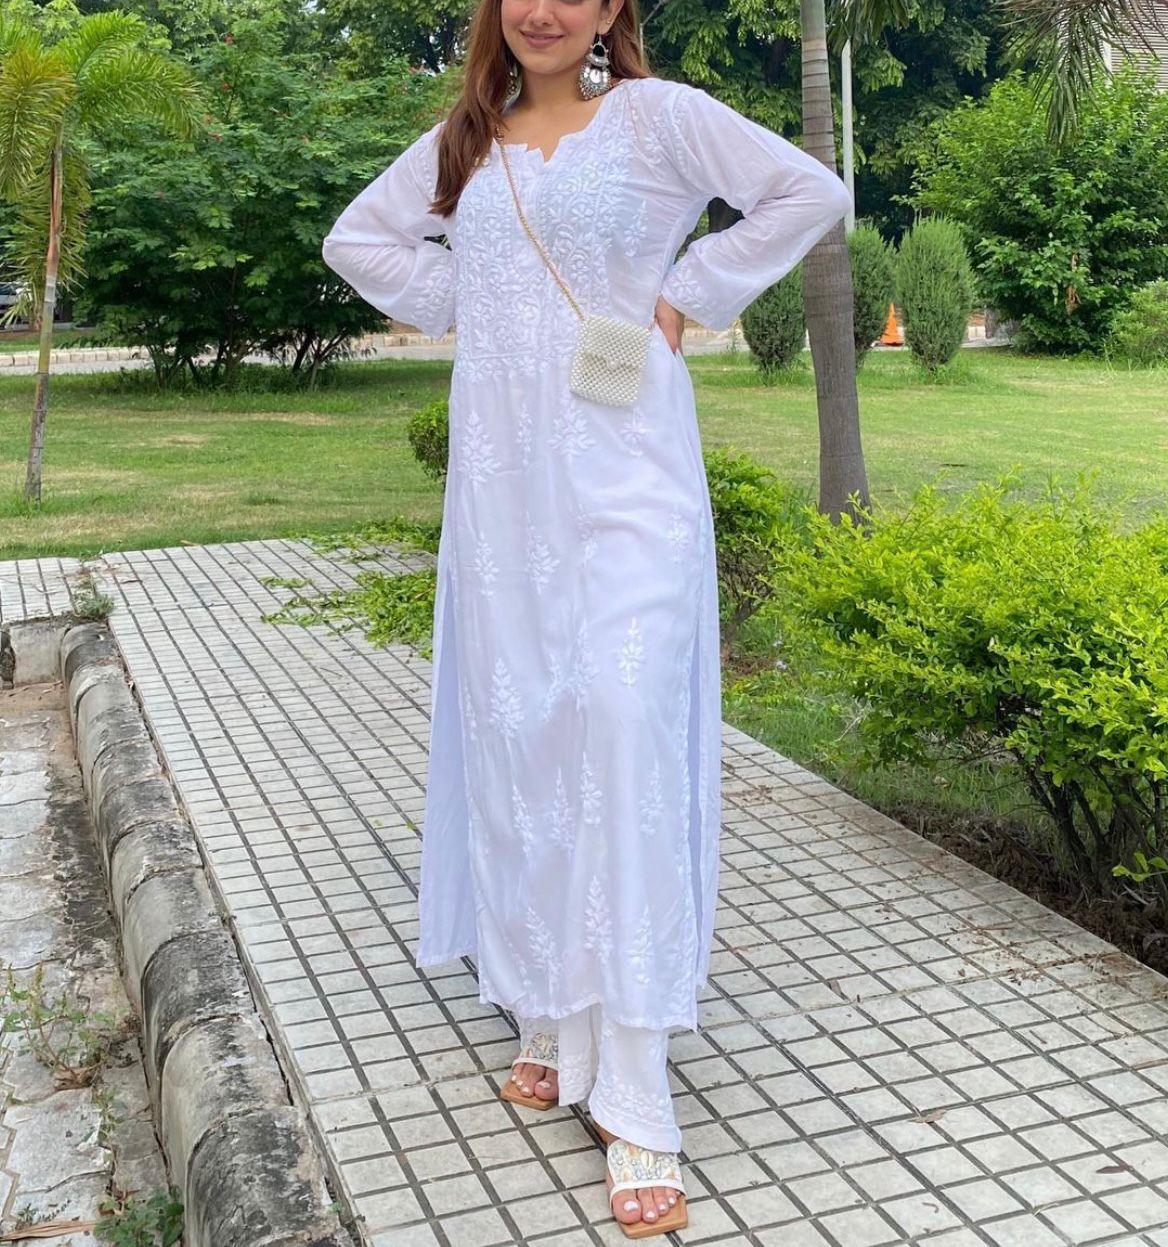 White Modal Straight Kurti with Fine Handwork Embroidery Shopping Online - Inayakhan Shop 